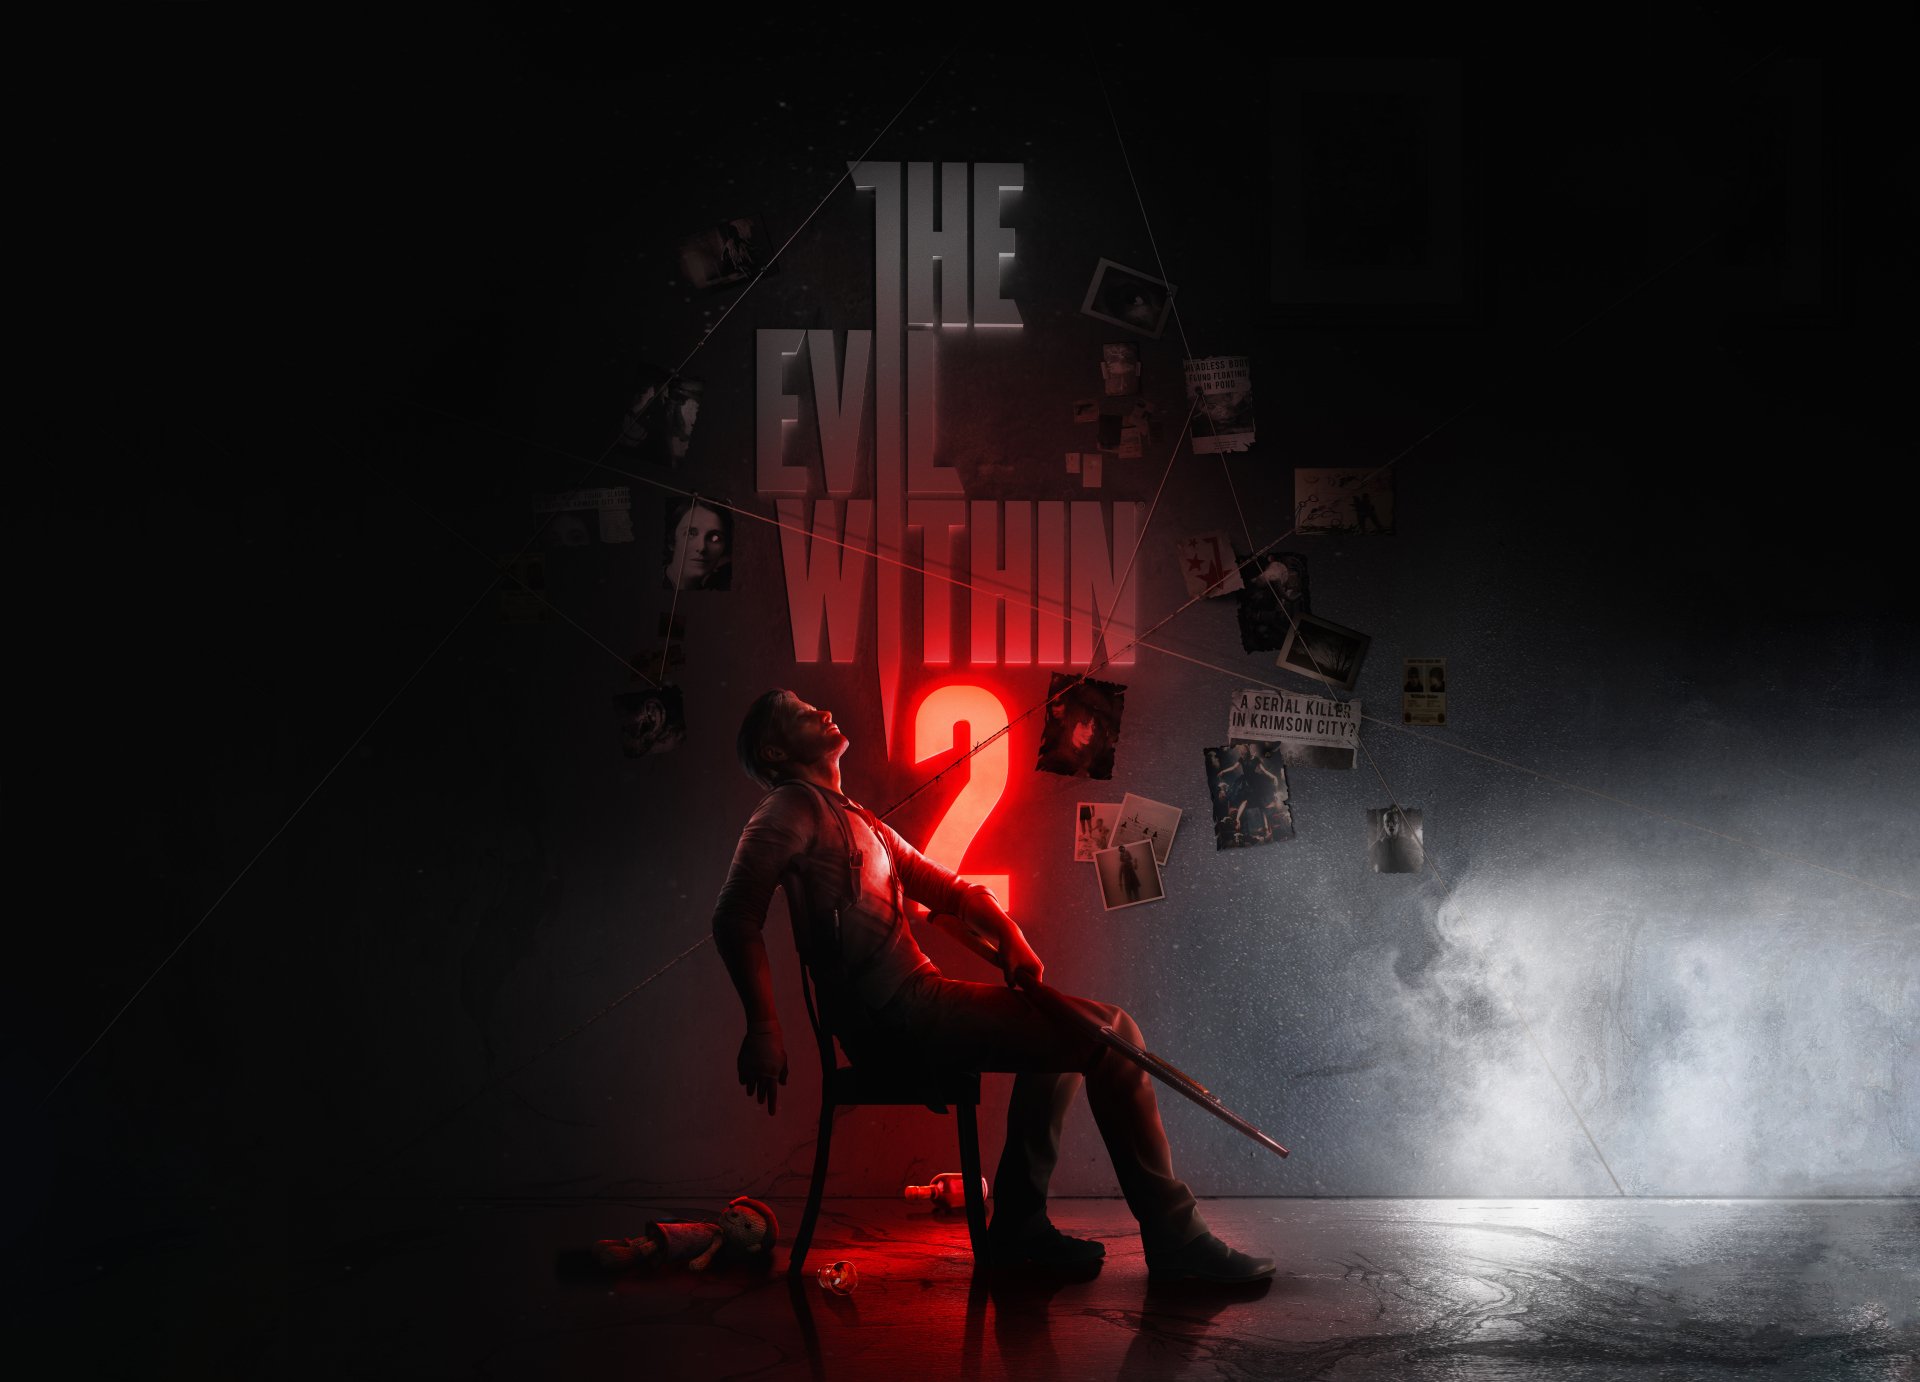 20 the evil within 2 hd wallpapers background images wallpaper abyss 20 the evil within 2 hd wallpapers